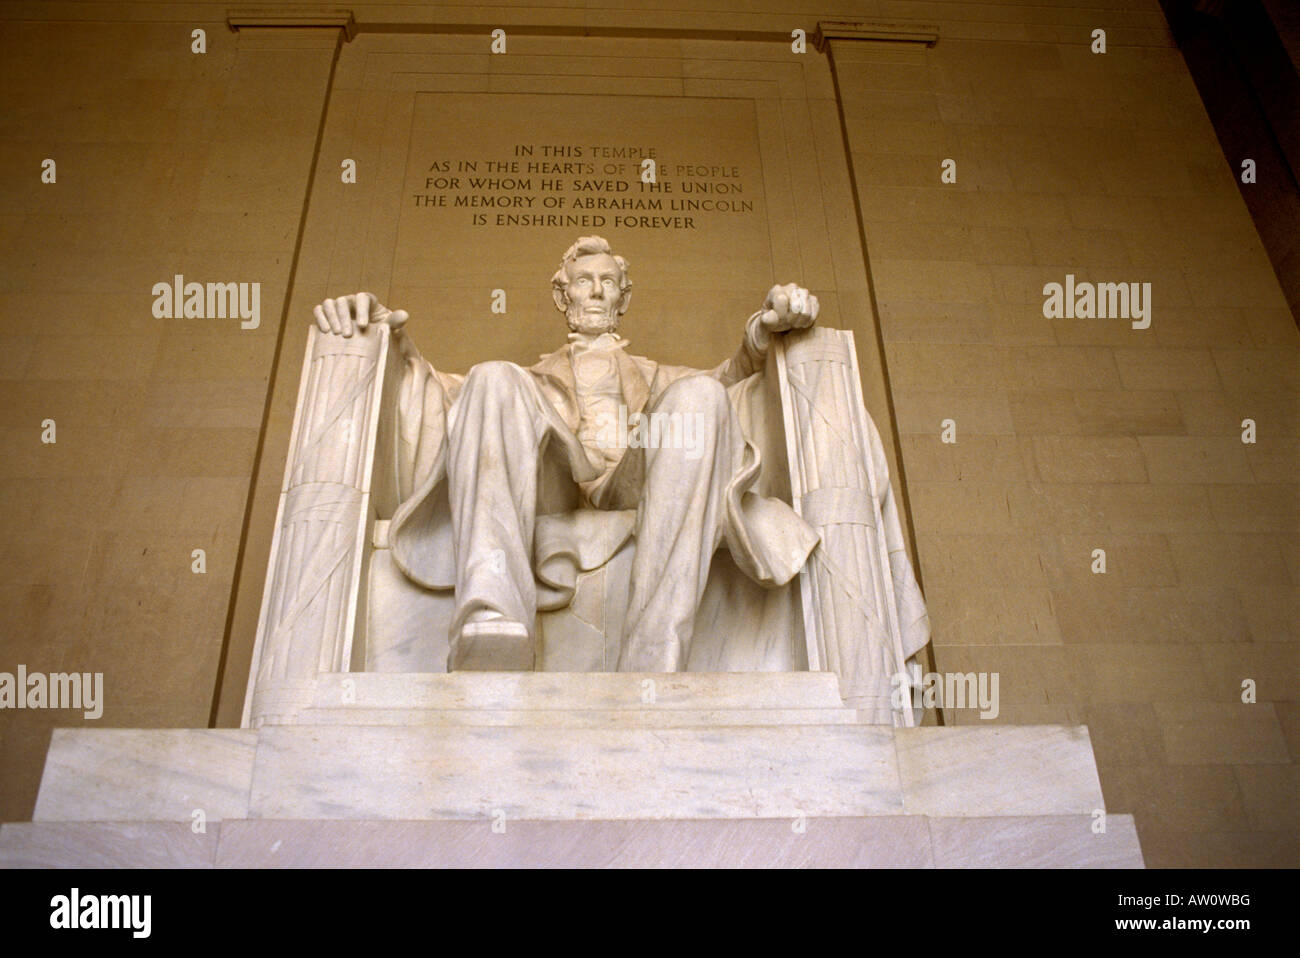 DC Washington DC DC Monuments Lincoln Memorial Abraham Lincoln presidential statue Lincoln seated white marble shrine Stock Photo